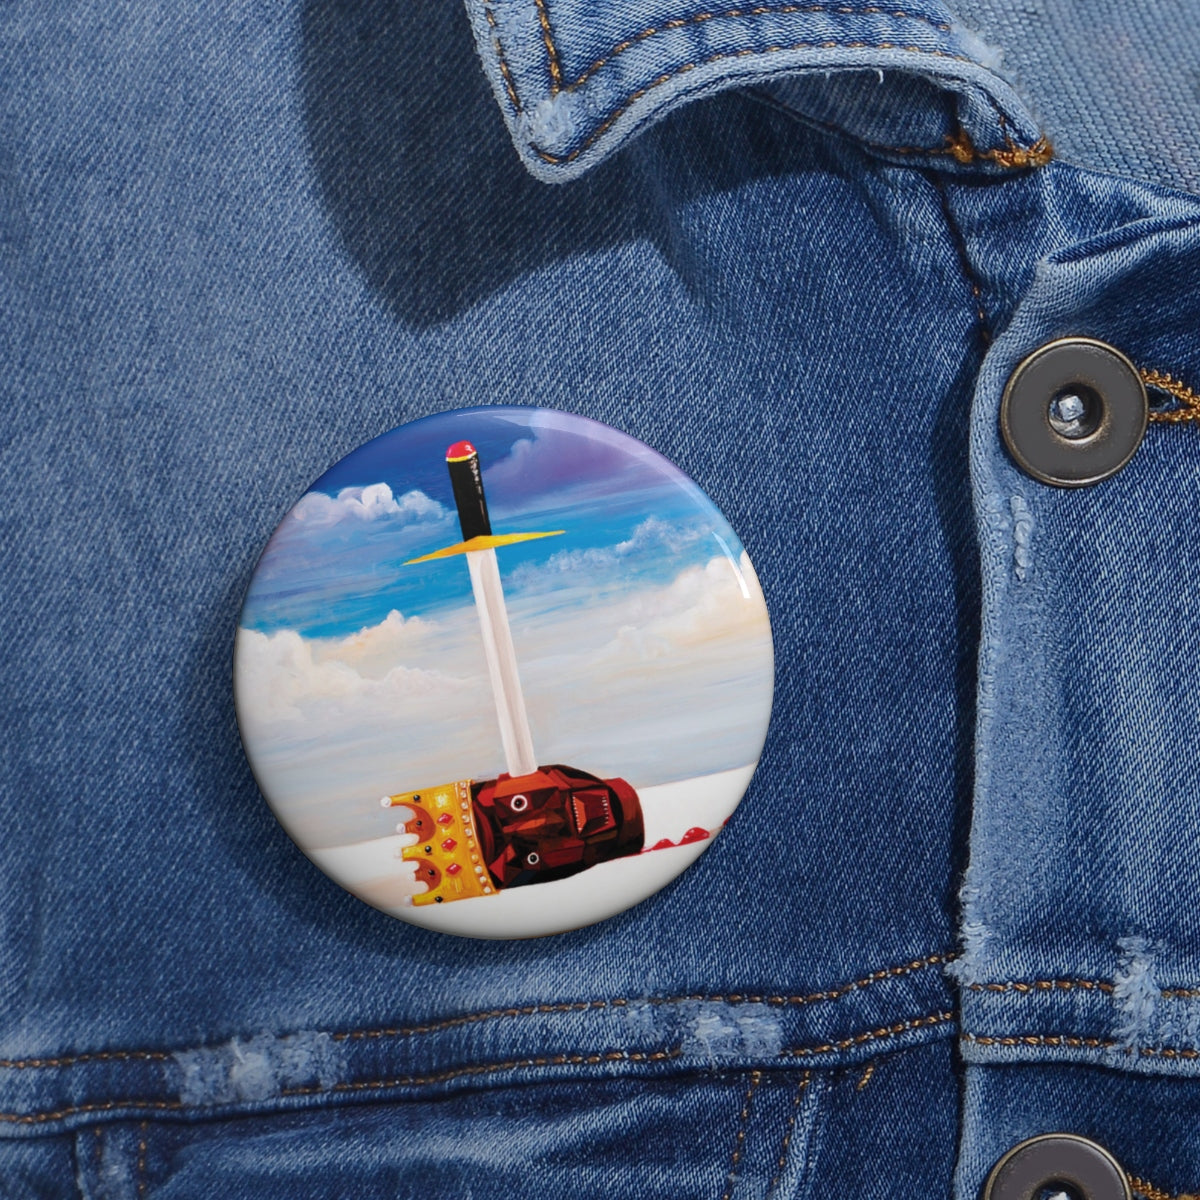 Kanye West inspired Dark Twisted Fantasy Pin Buttons-Archethype